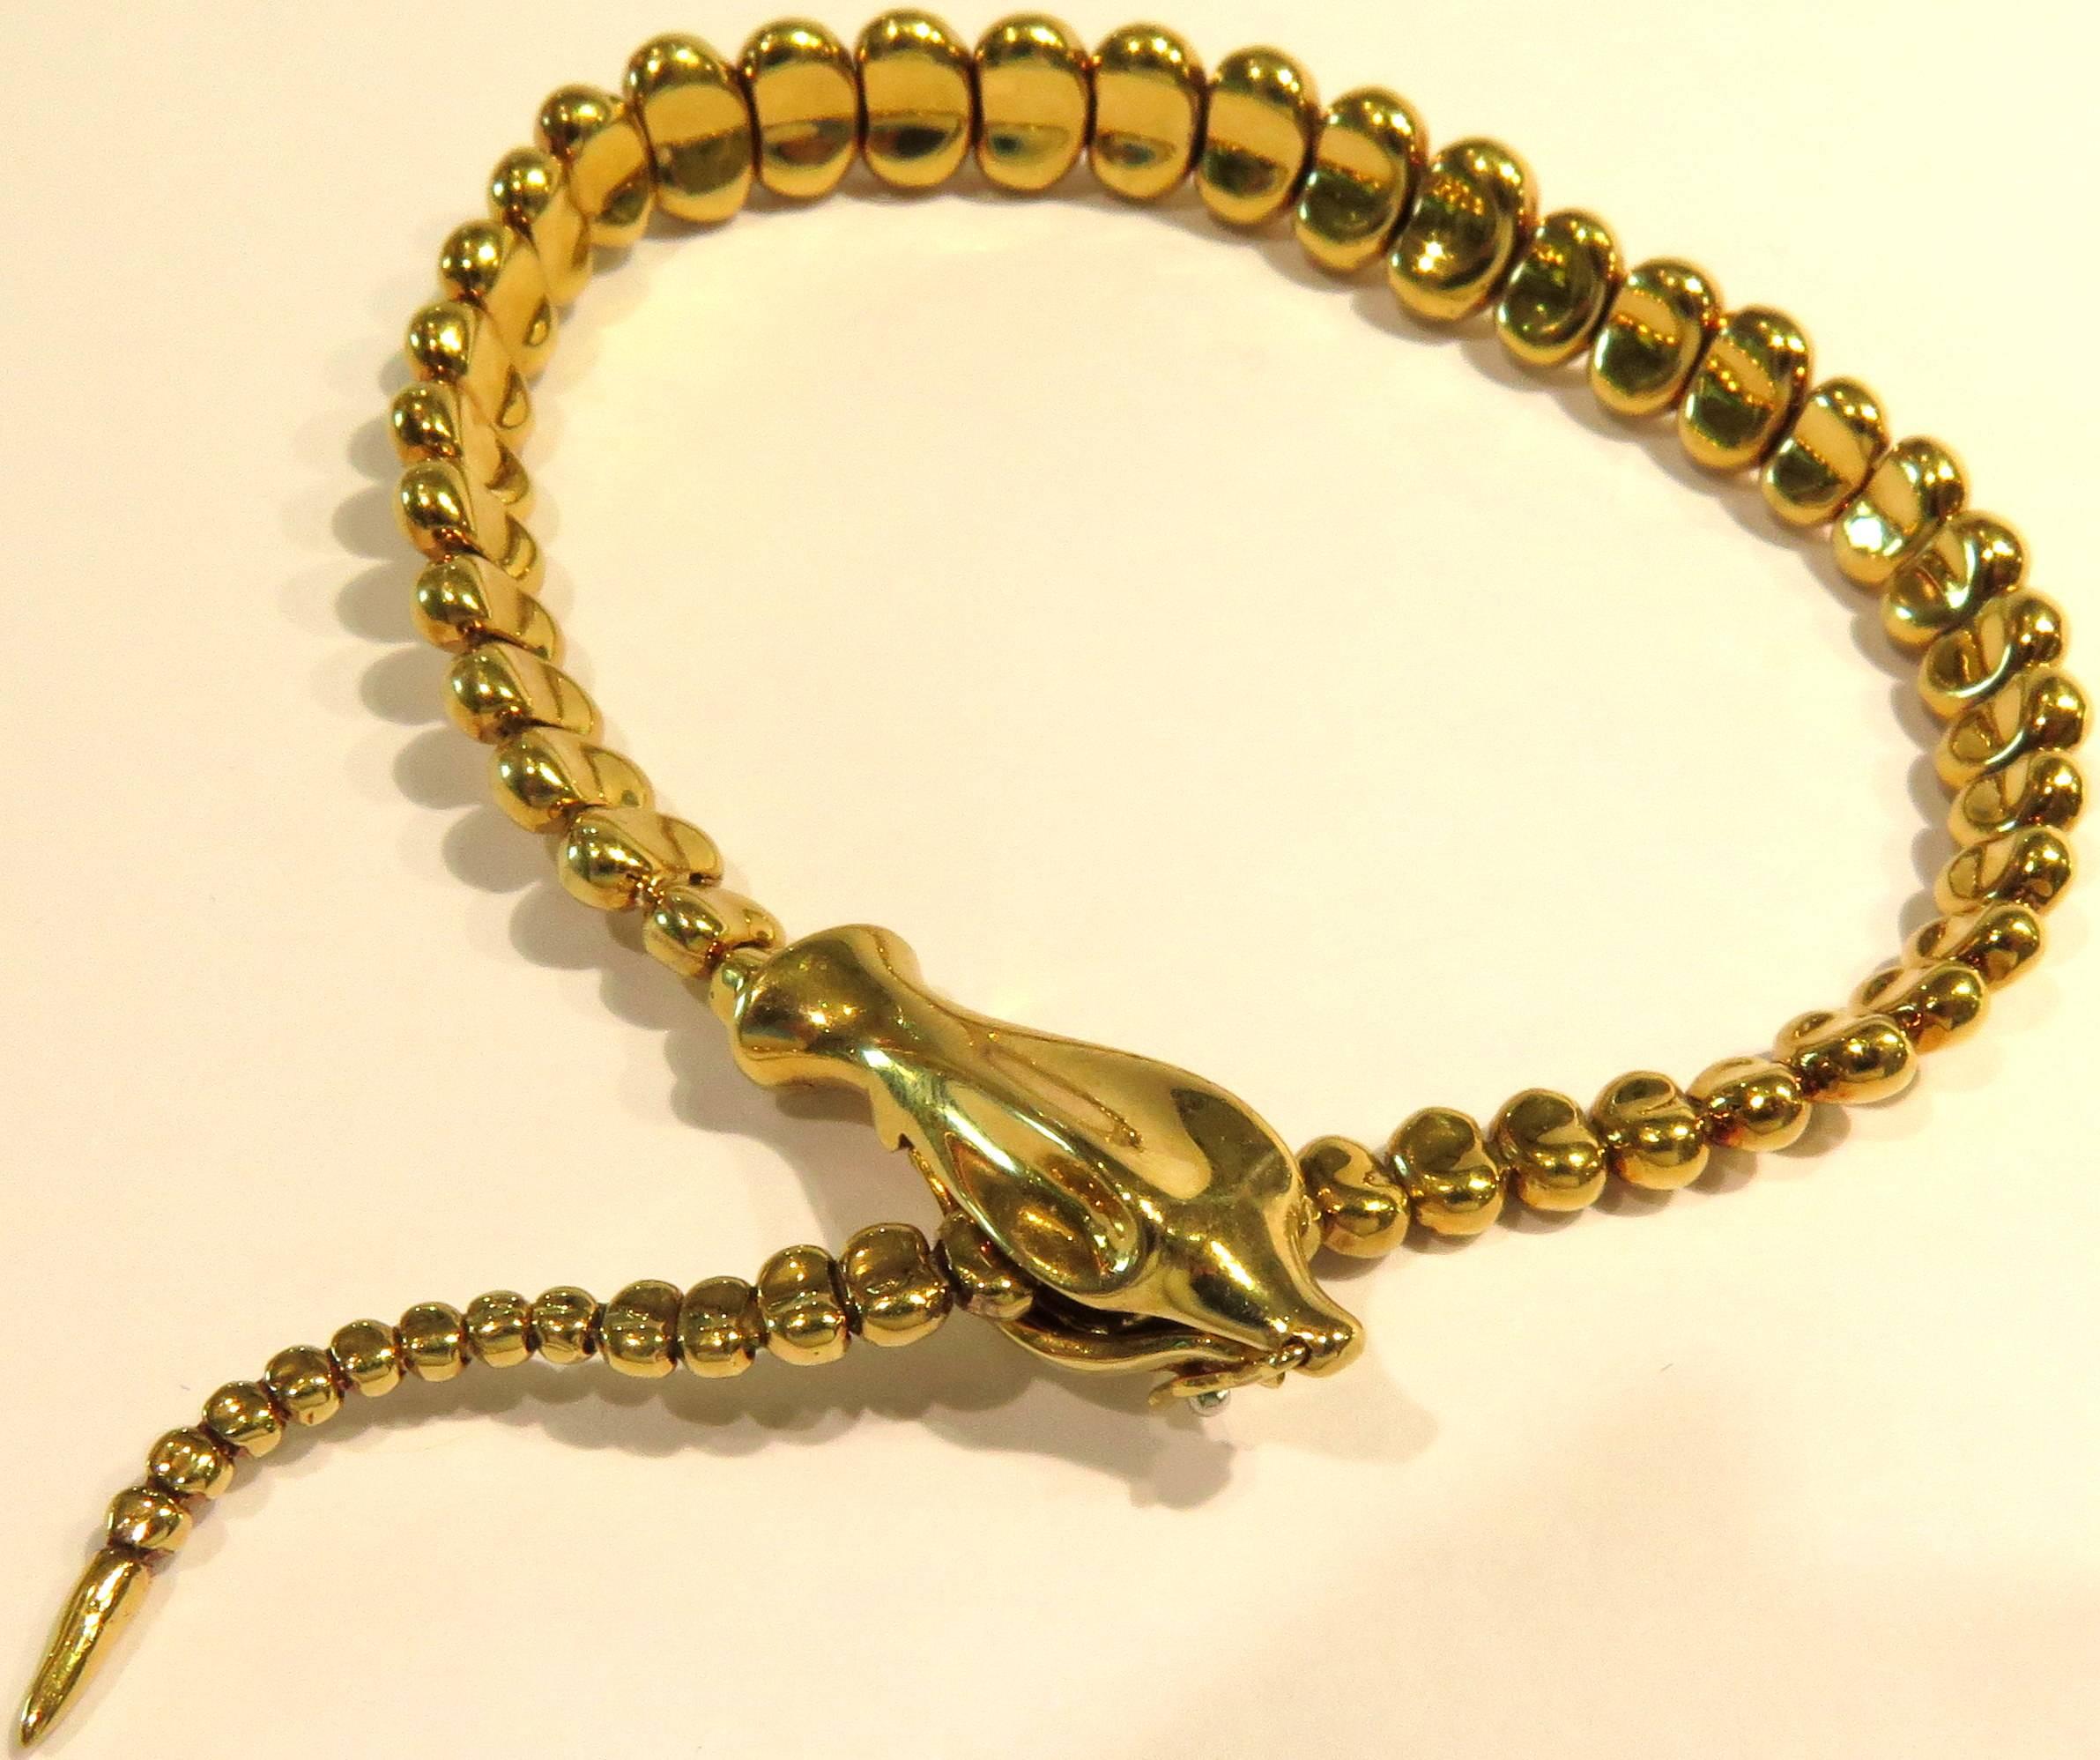 This versatile and chic Tiffany 18k lariat snake bracelet is adjustable enough to fit from a tiny wrist, up to 7 1/2 inch wrist comfortably. The clasp in the snakes head, allows the bracelet to fasten securely at diffent lengths. There is a safety